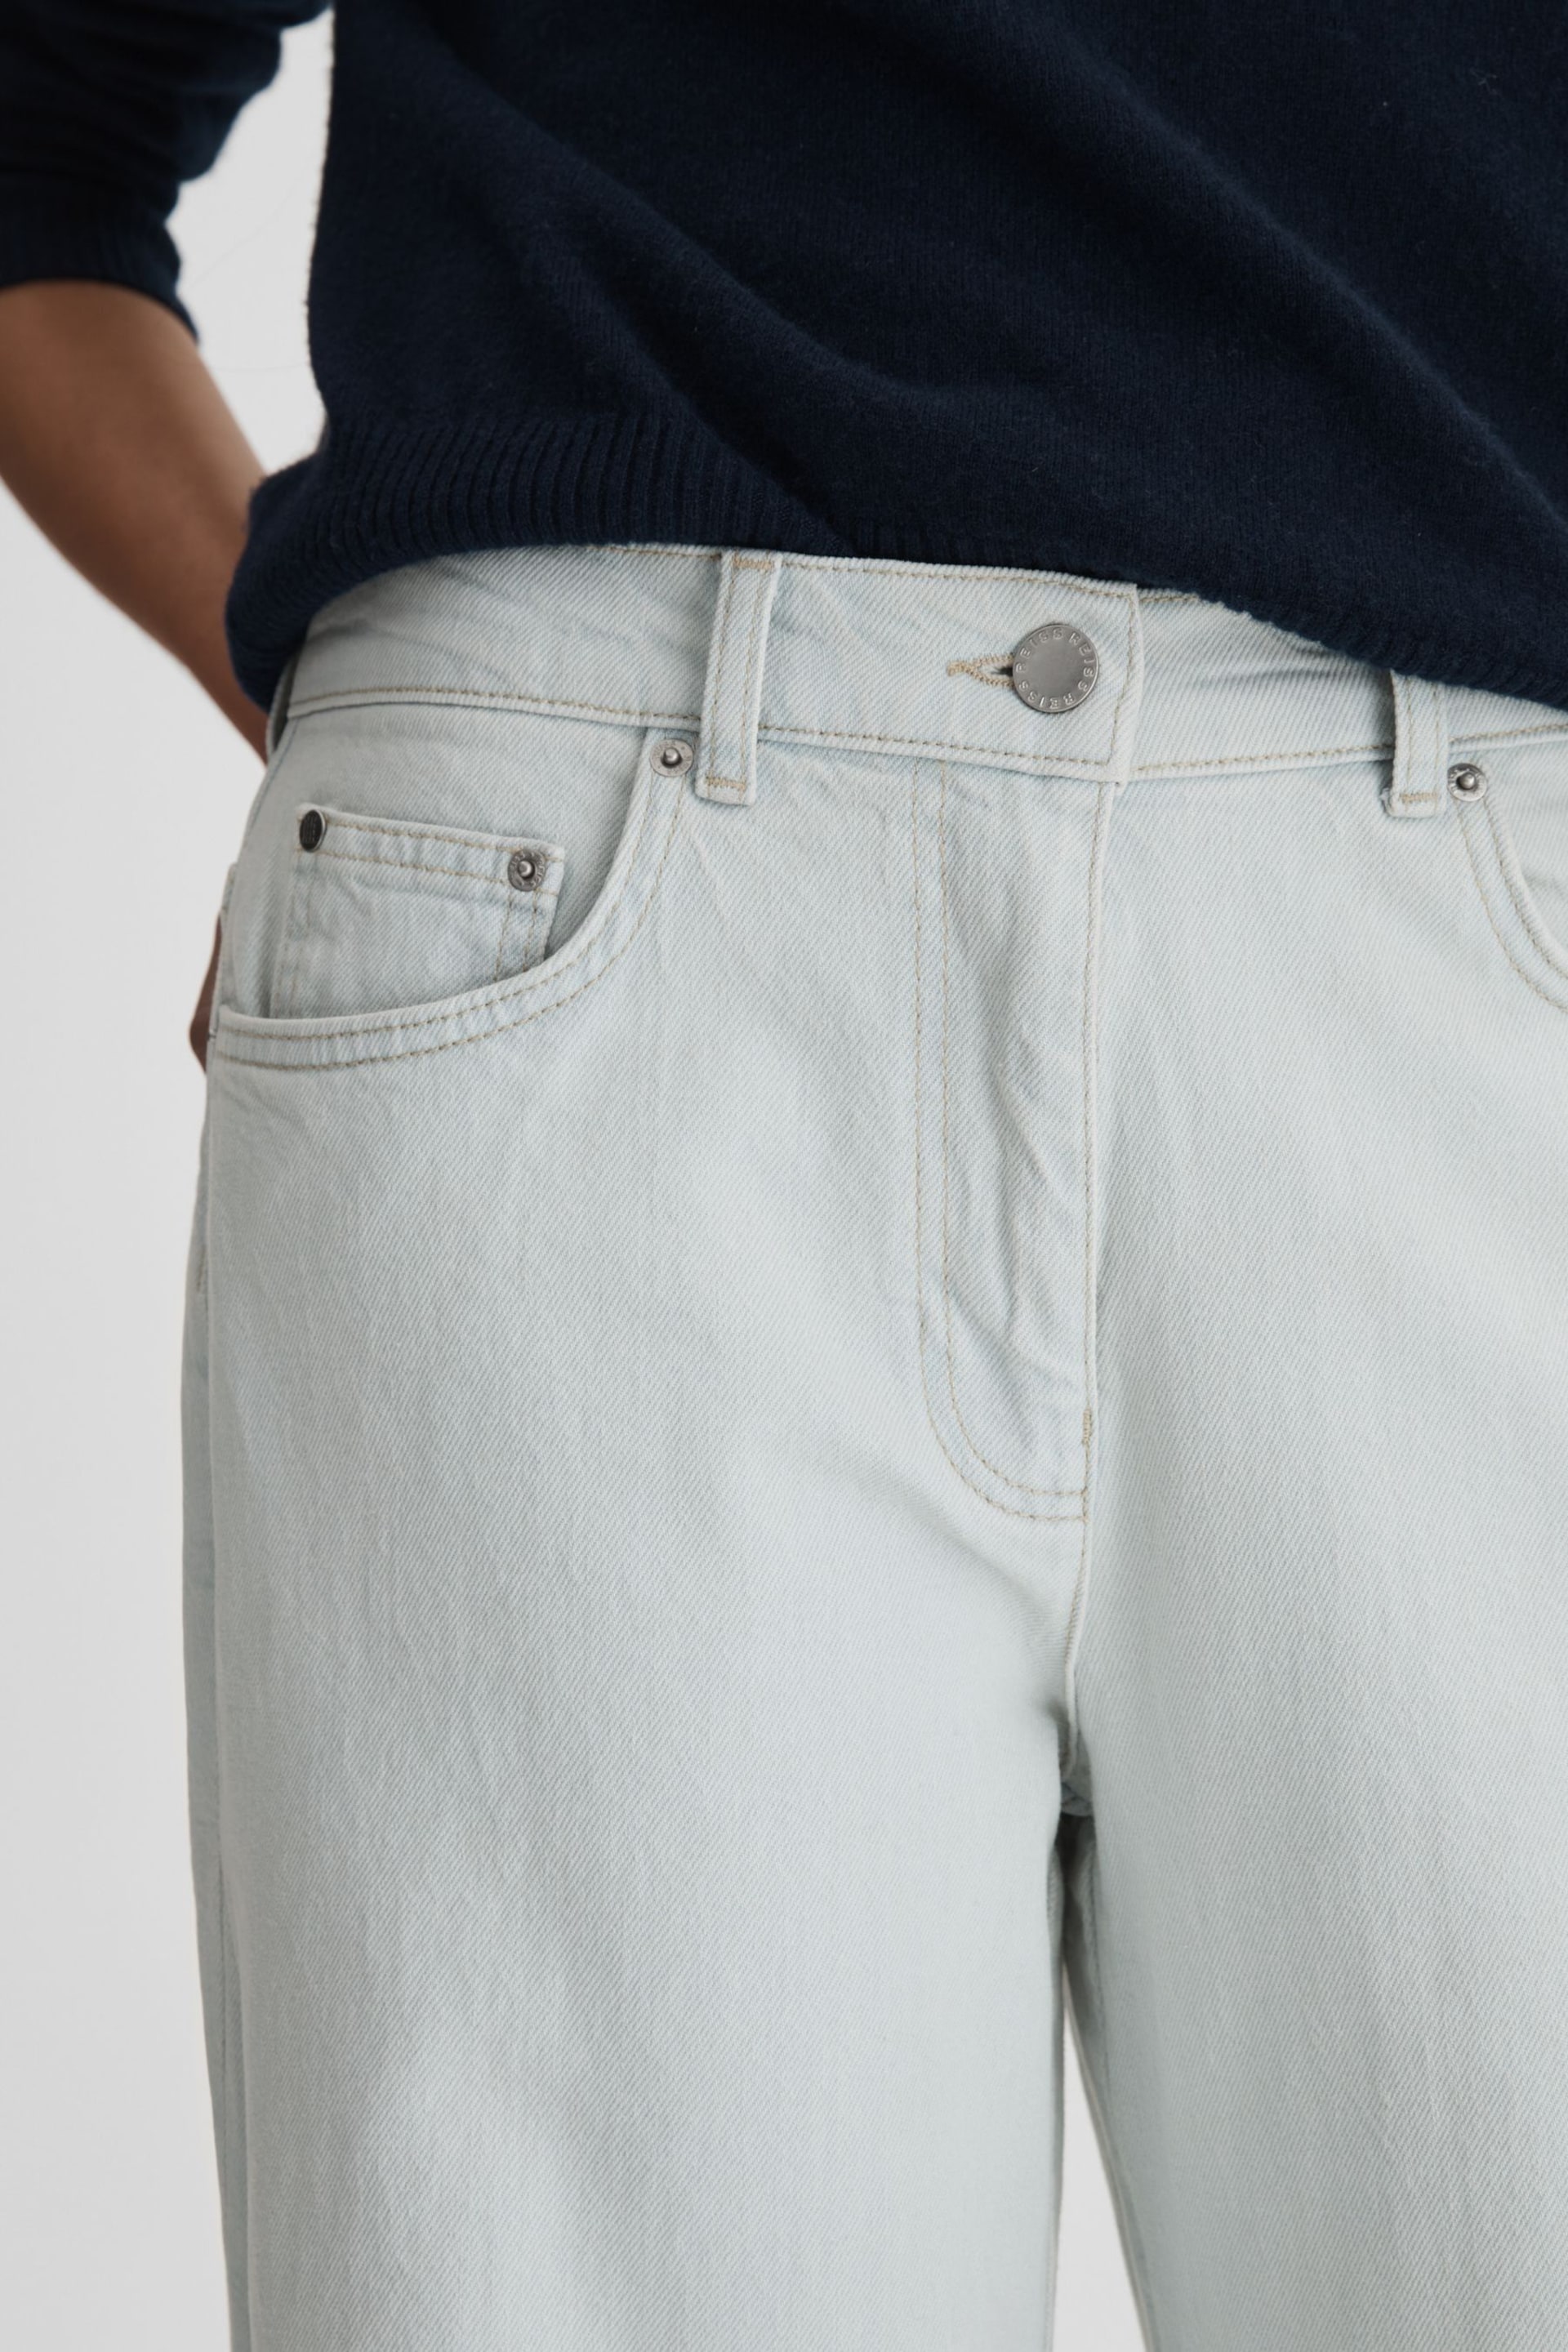 Reiss Light Blue Maize Flared Side Seam Jeans - Image 3 of 5